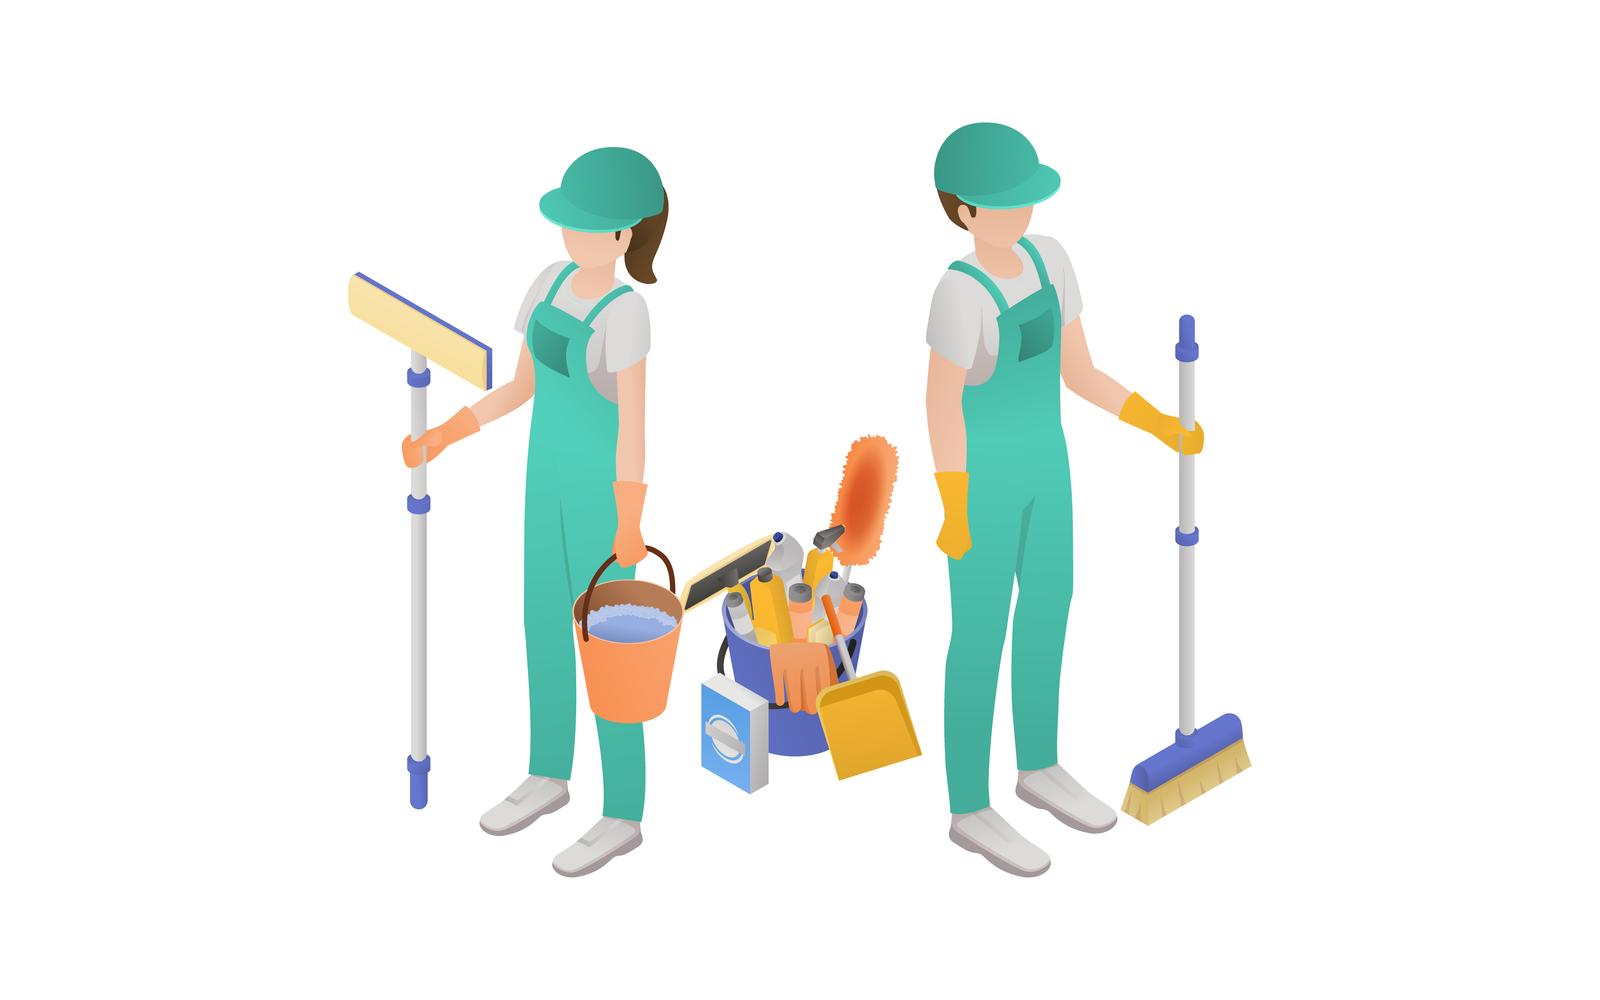 Professional Cleaning Service Isometric 6 Vector Illustration Concept